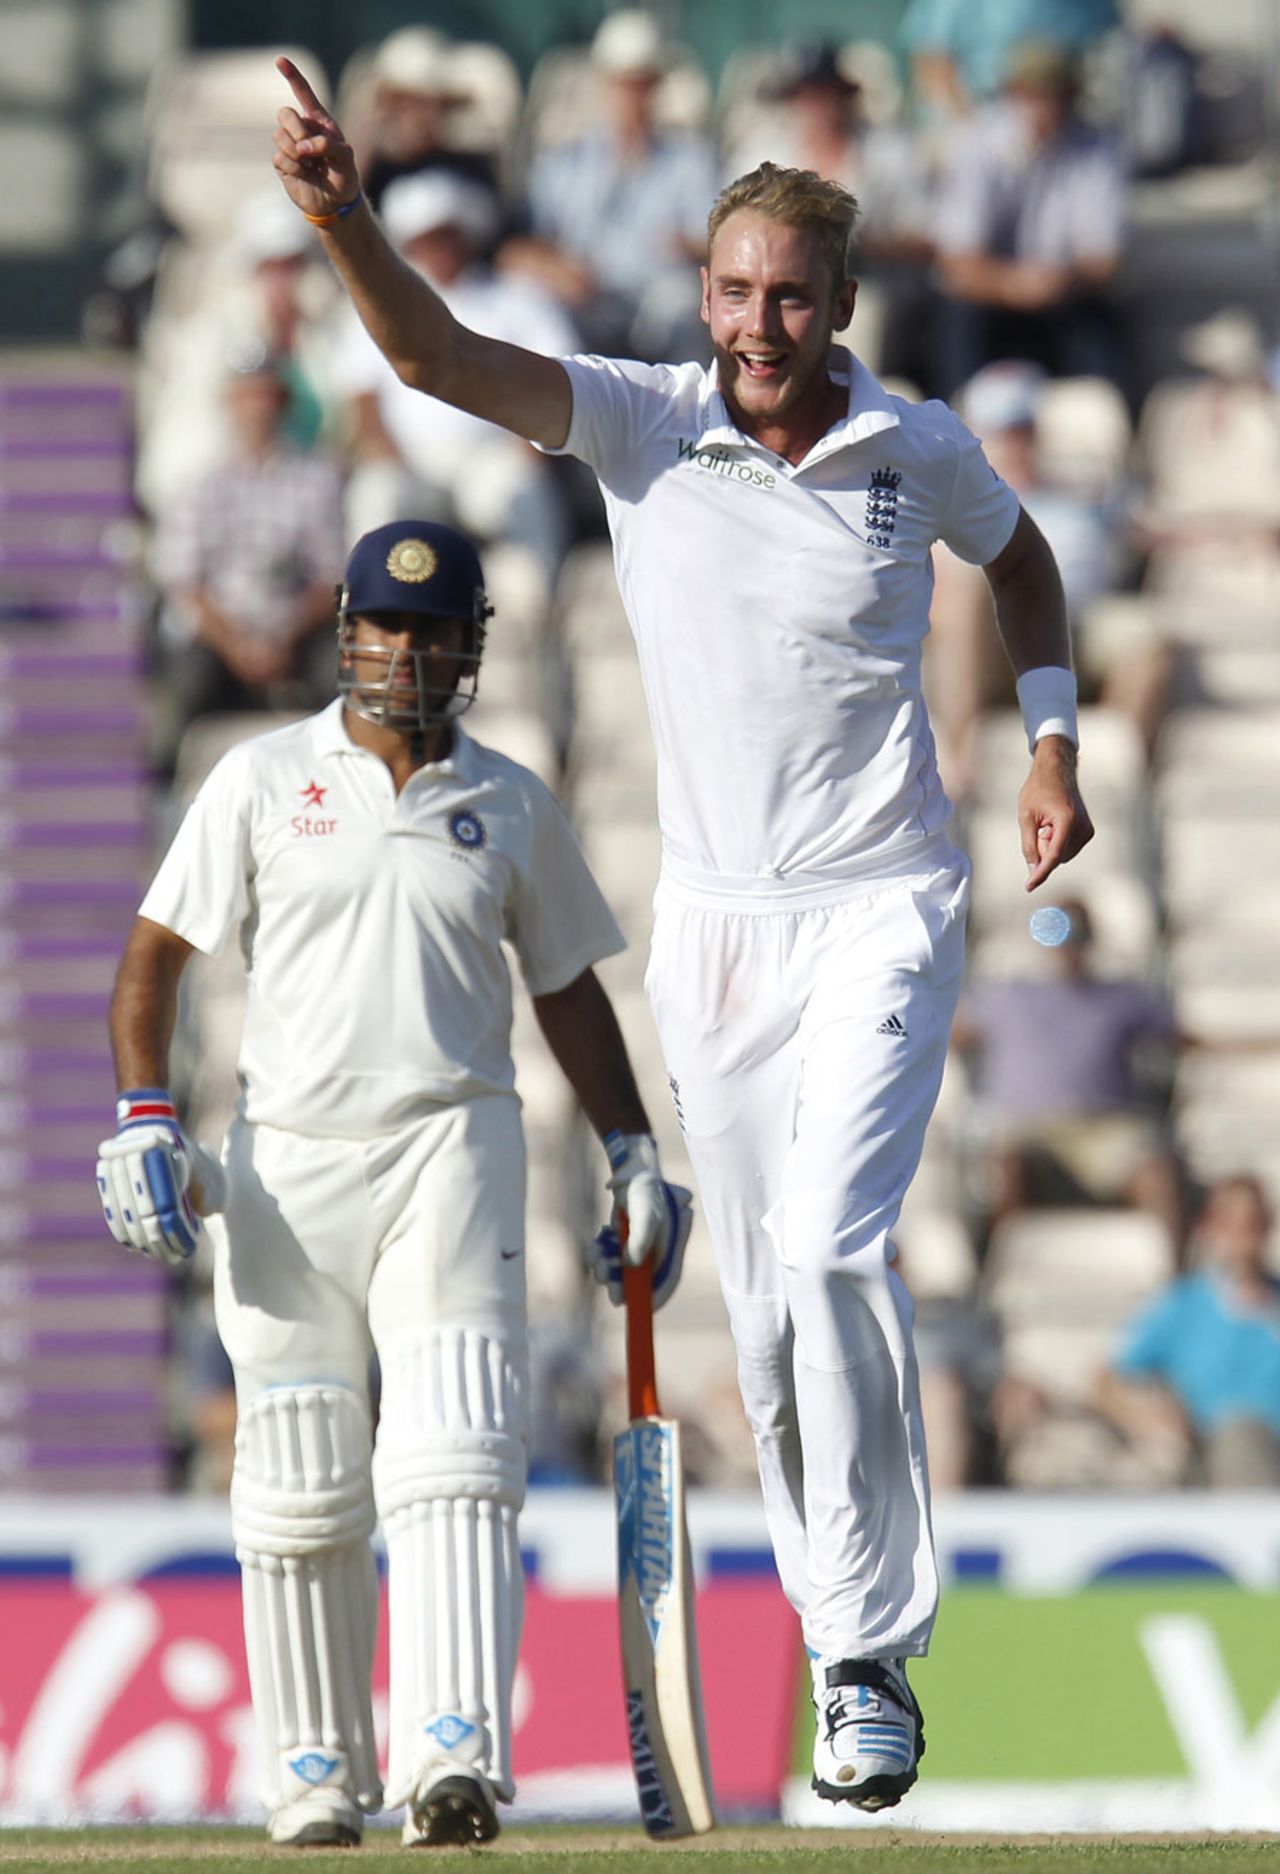 Stuart Broad picked up his third wicket late in the day, England v India, 3rd Investec Test, Ageas Bowl, 3rd day, July 29, 2014